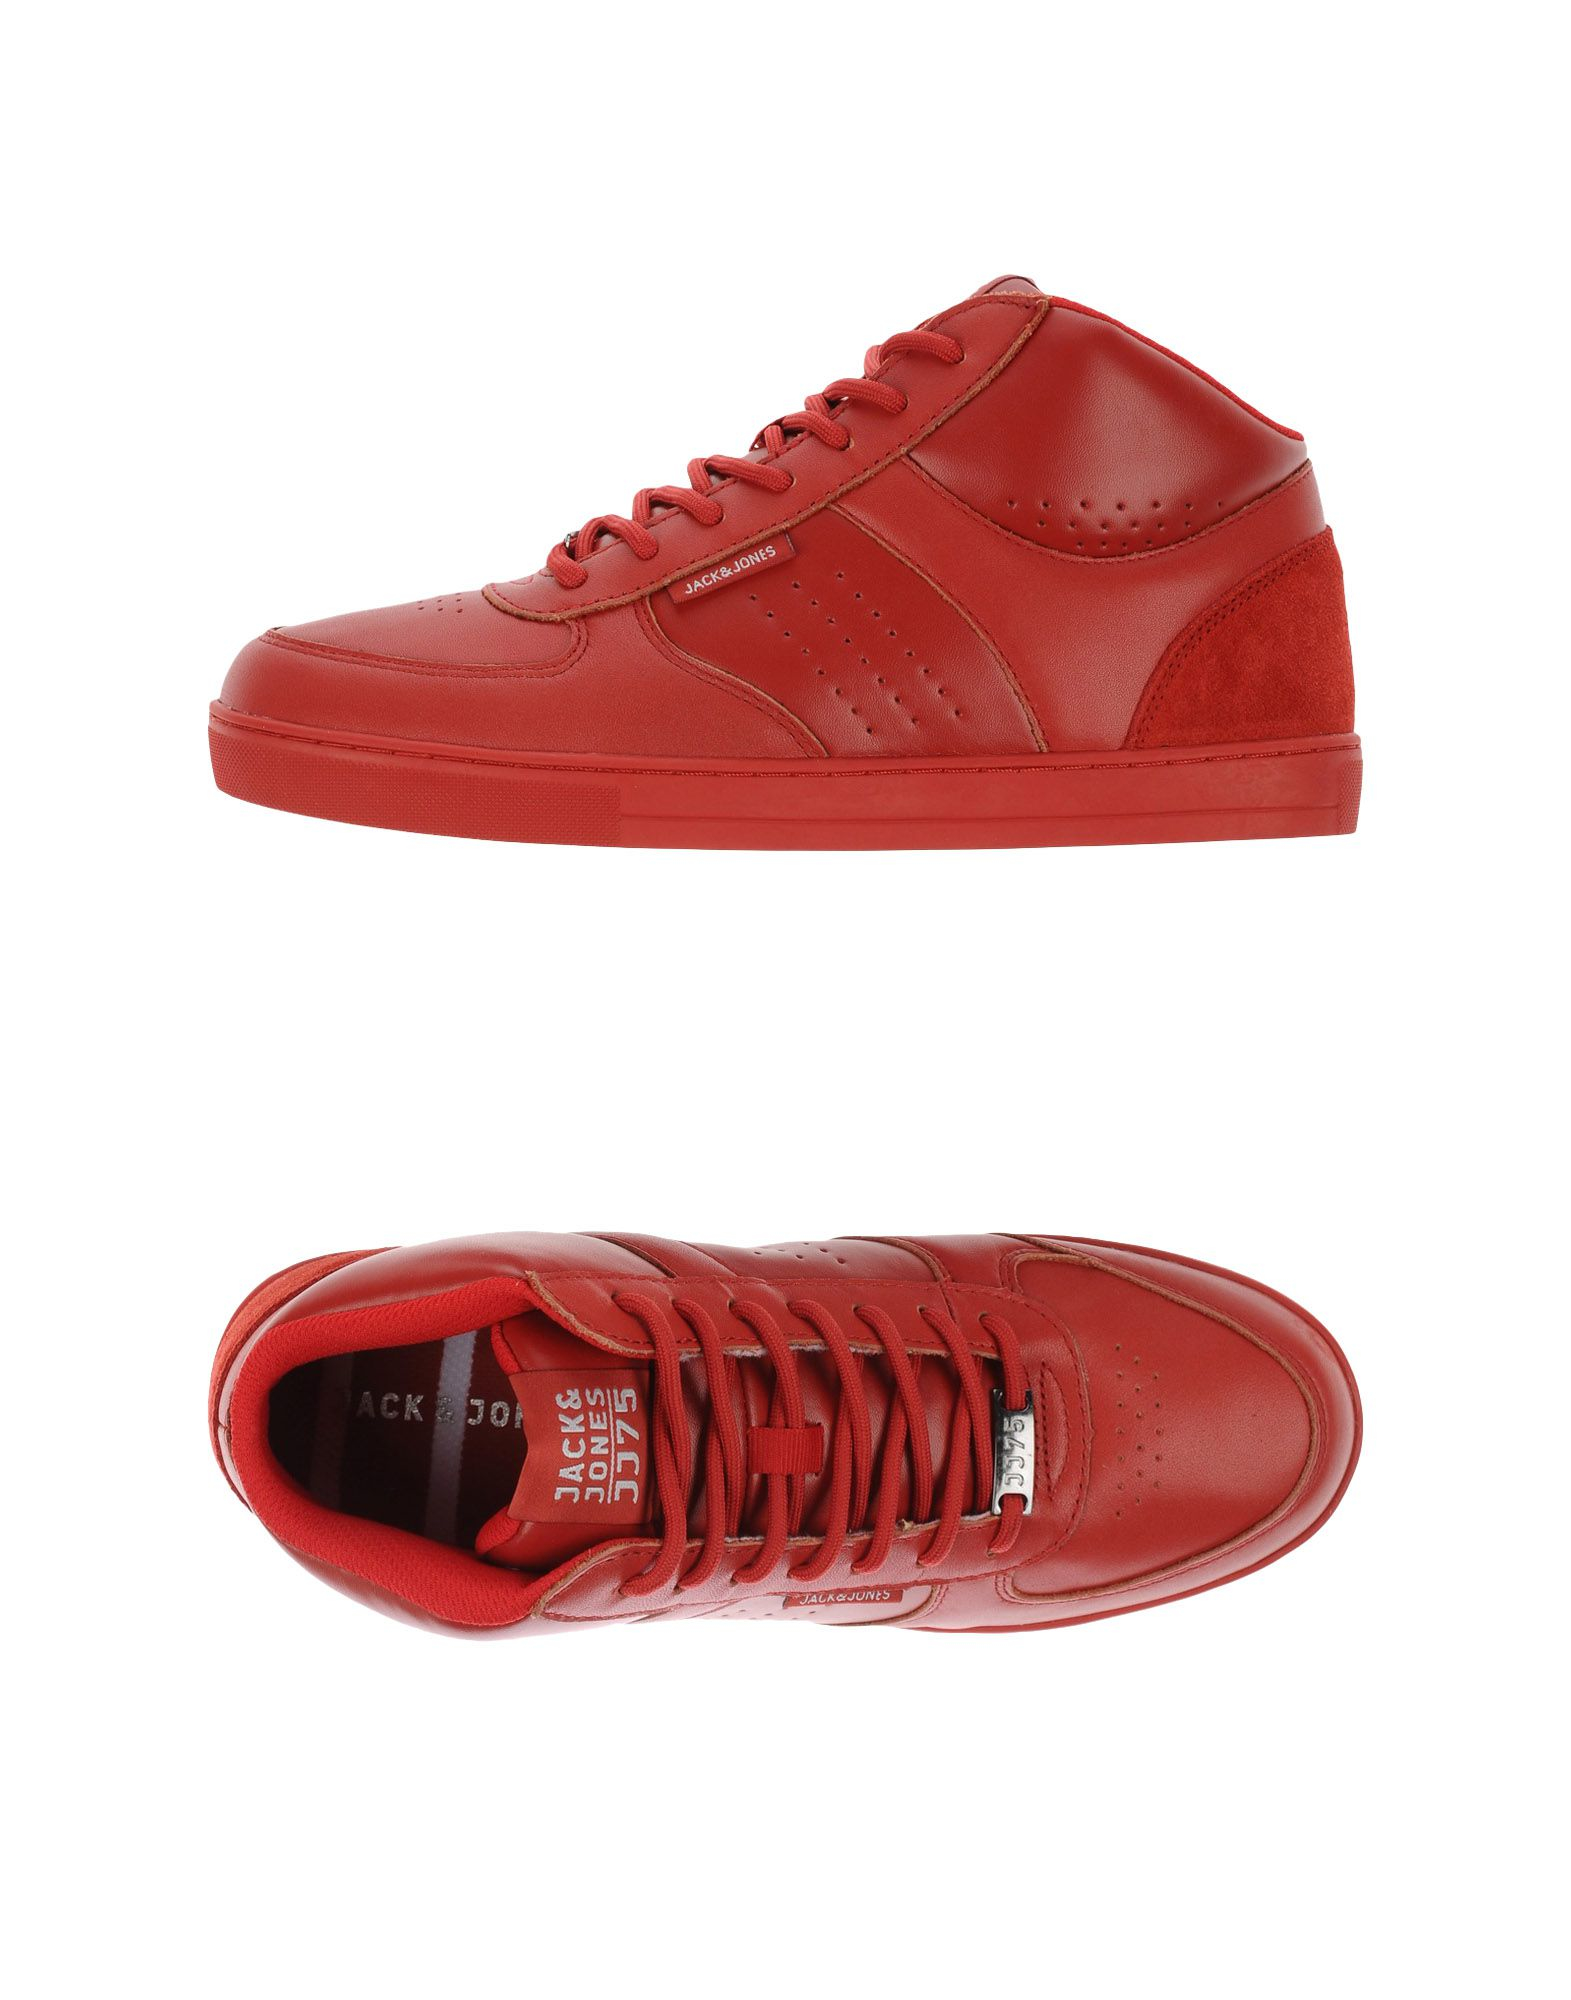 High-tops \u0026 Trainers in Red for Men - Lyst